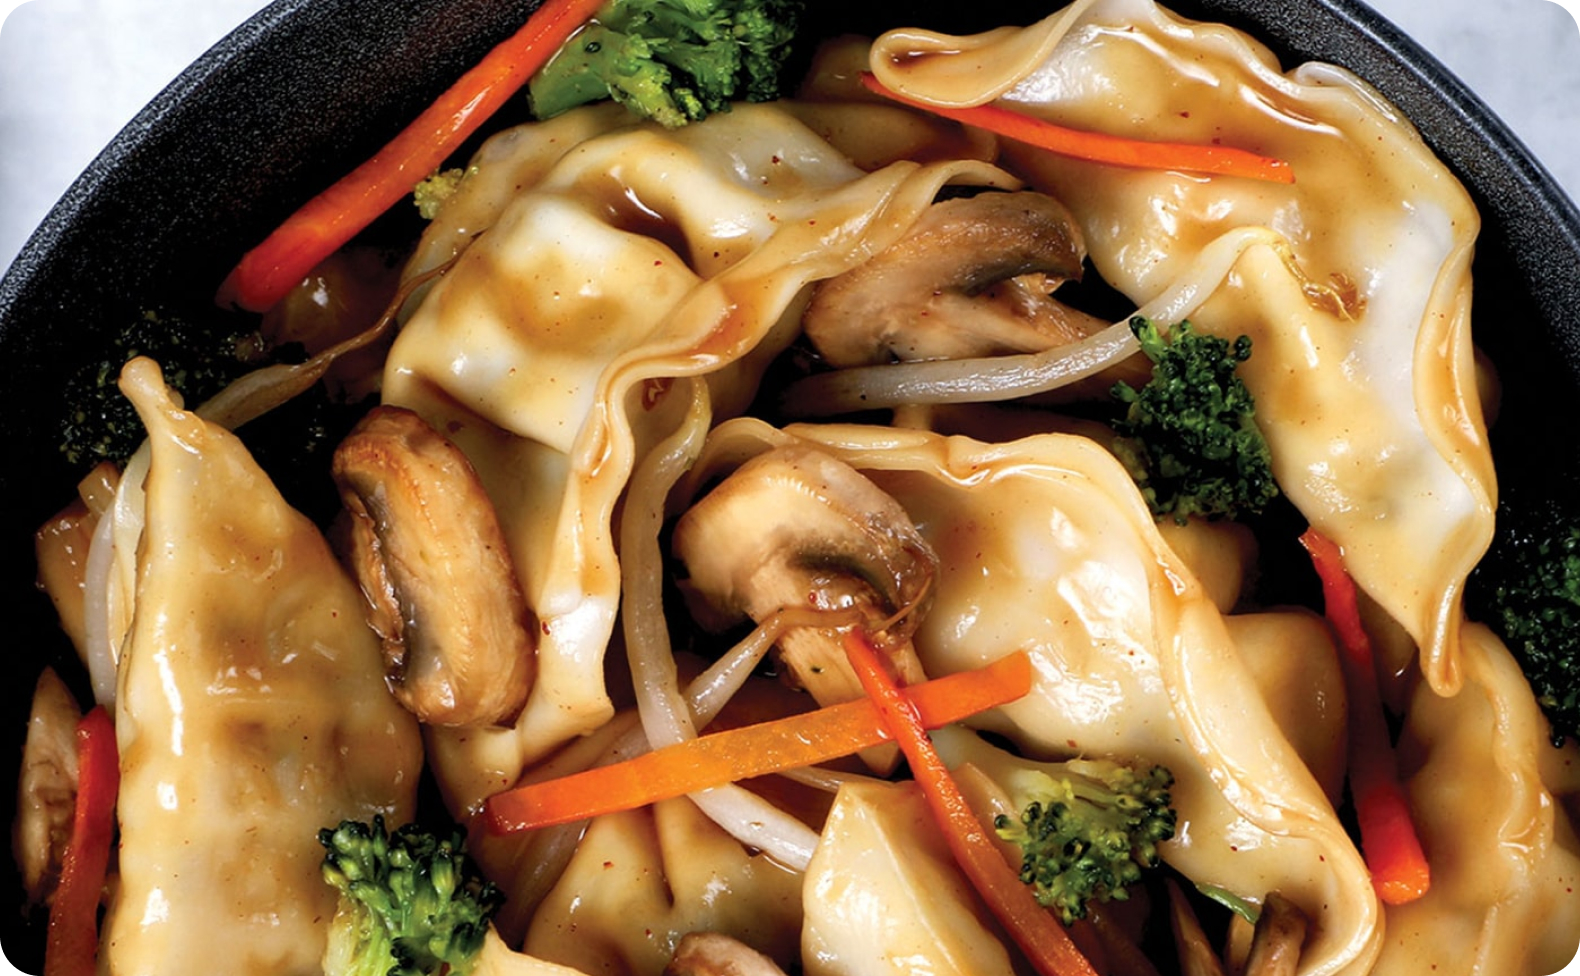 Stir fry containing a combination of dumplings, broccoli, mushrooms and carrots.